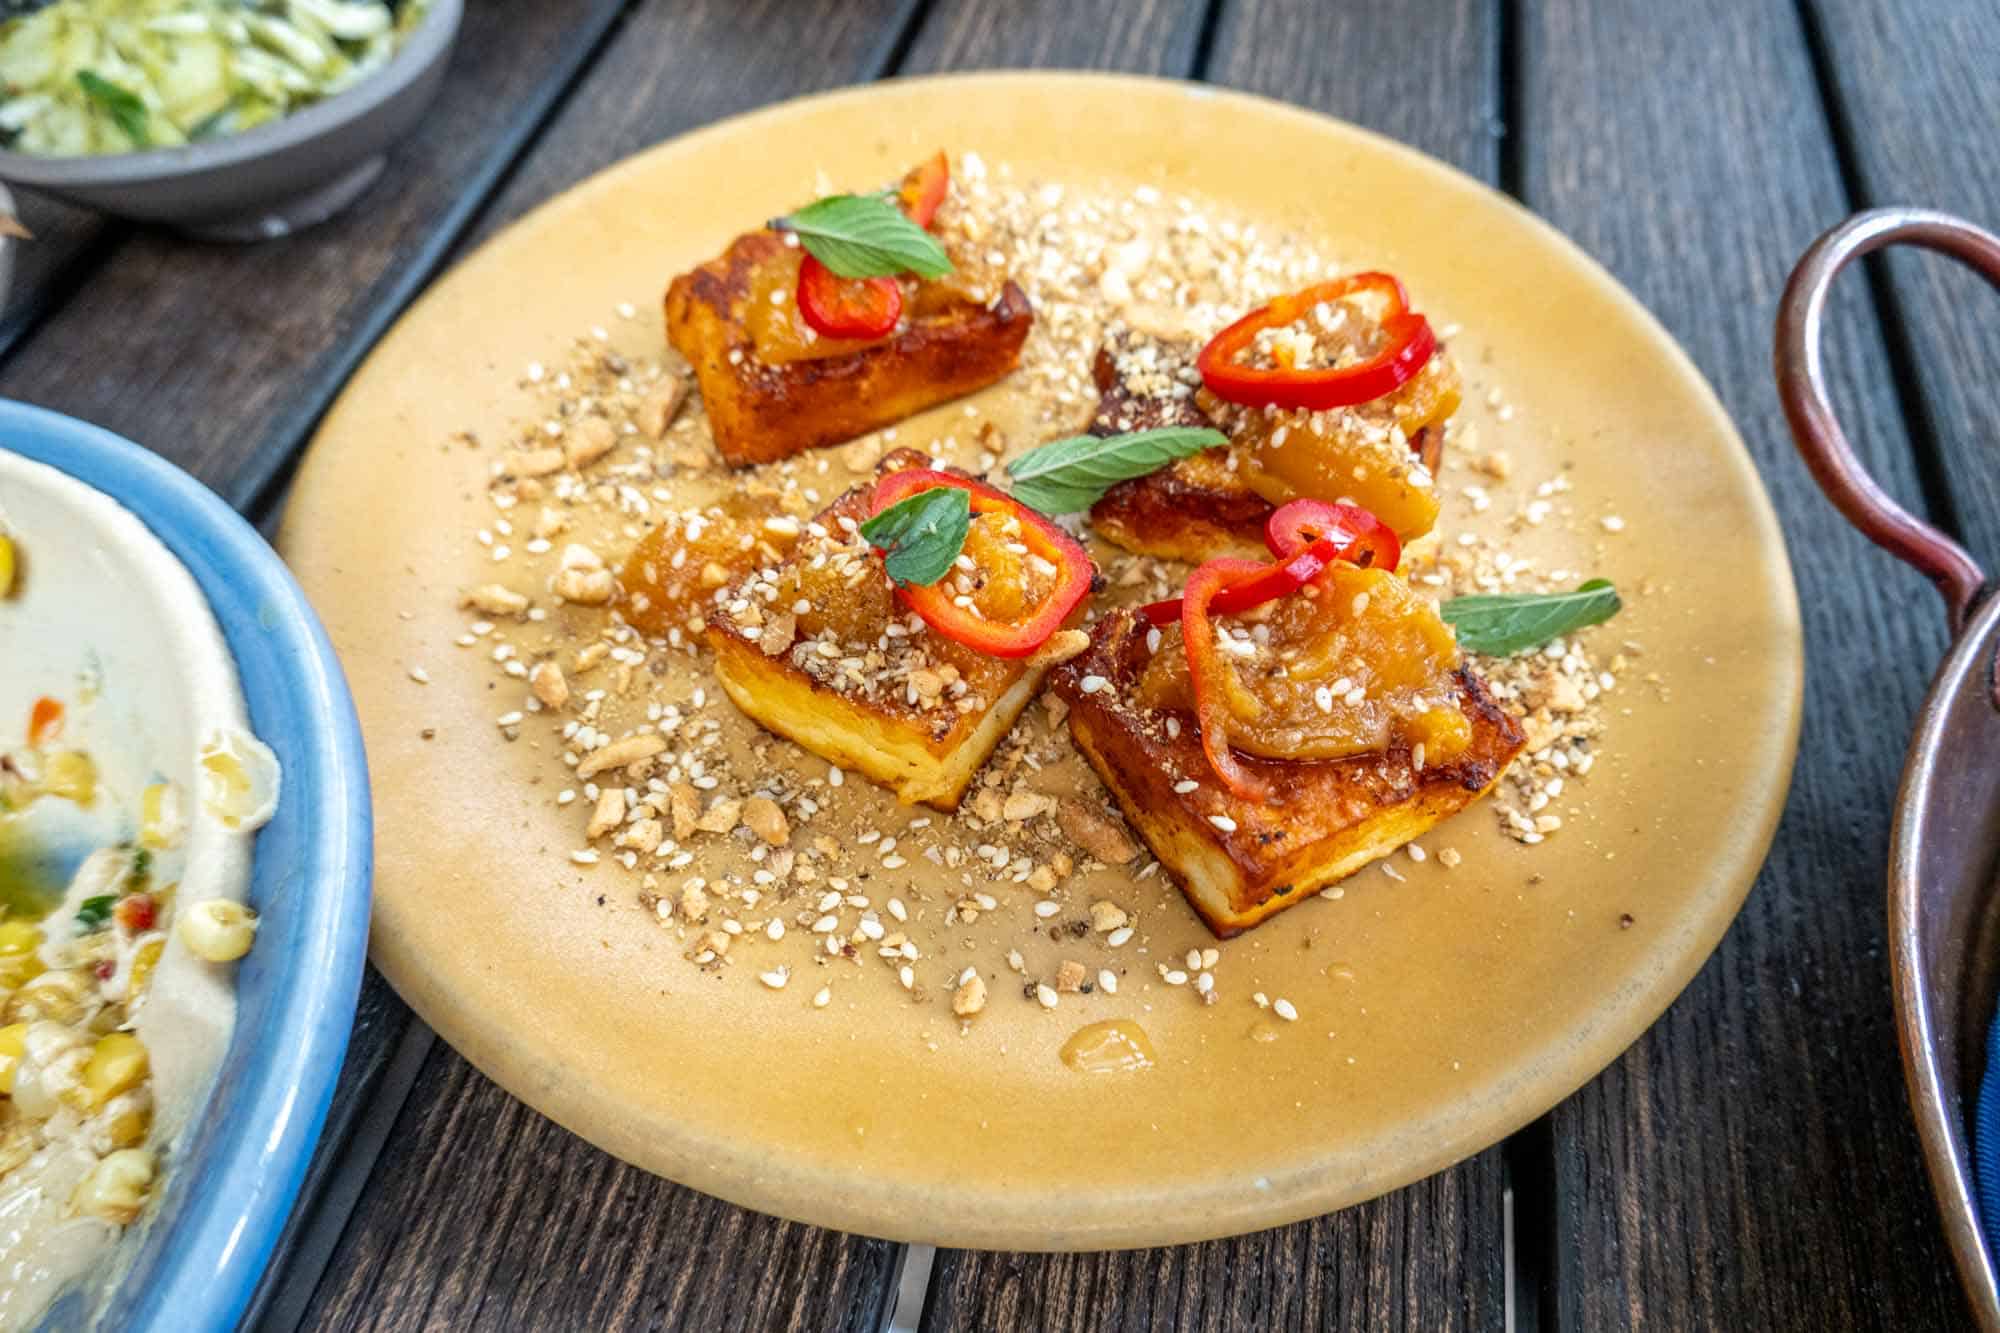 Fried haloumi cheese topped with red peppers